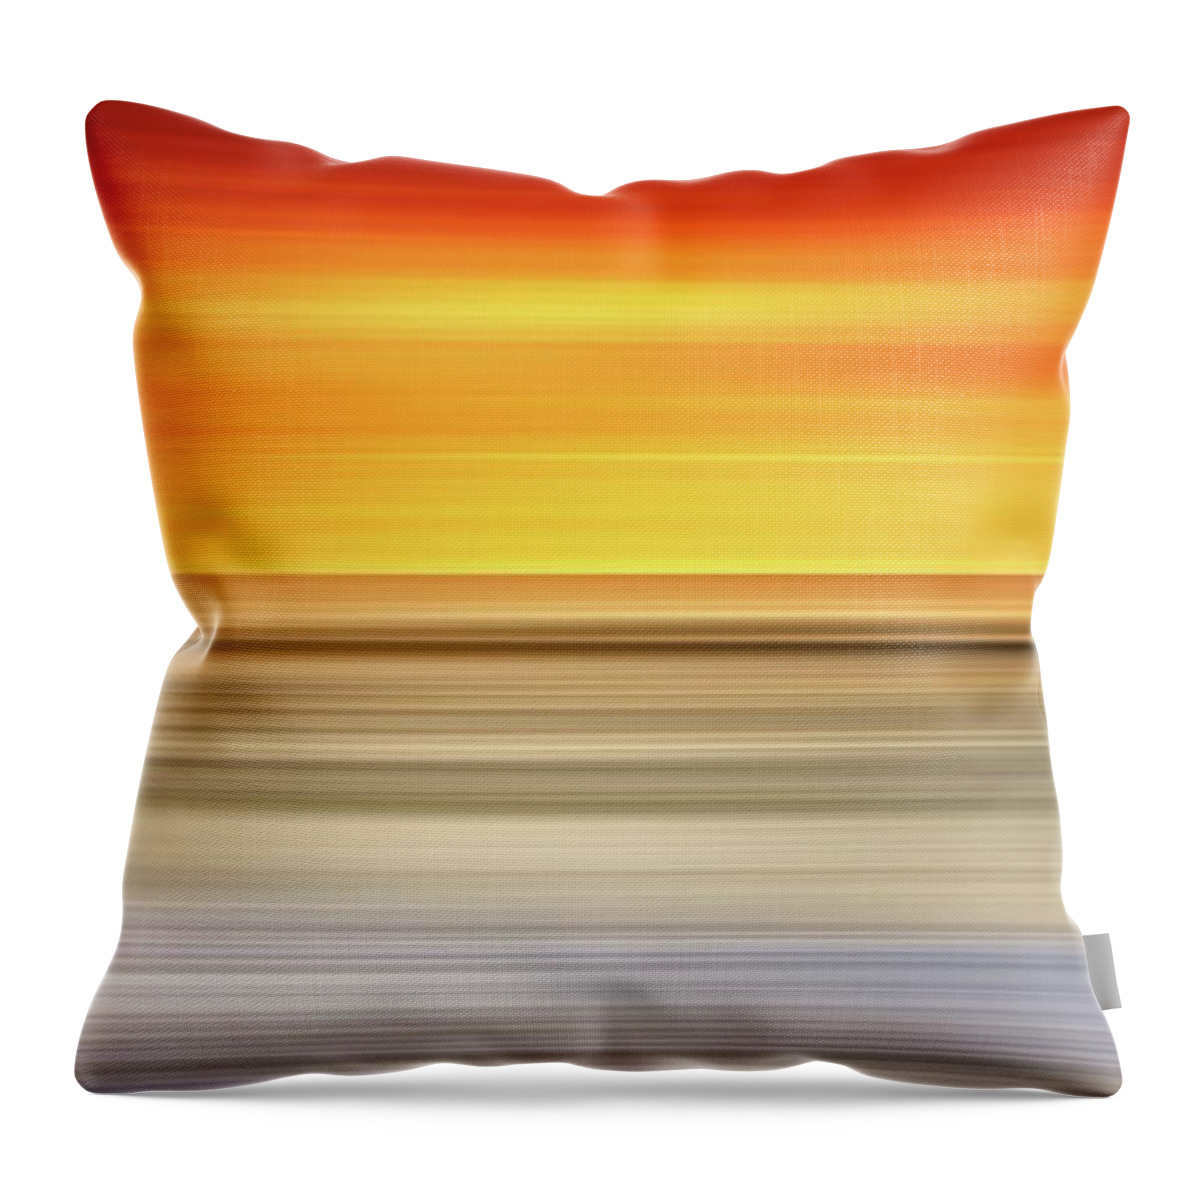 Abstract Pano Throw Pillow featuring the digital art Abstract sunset colors over a seascape by Stefano Senise